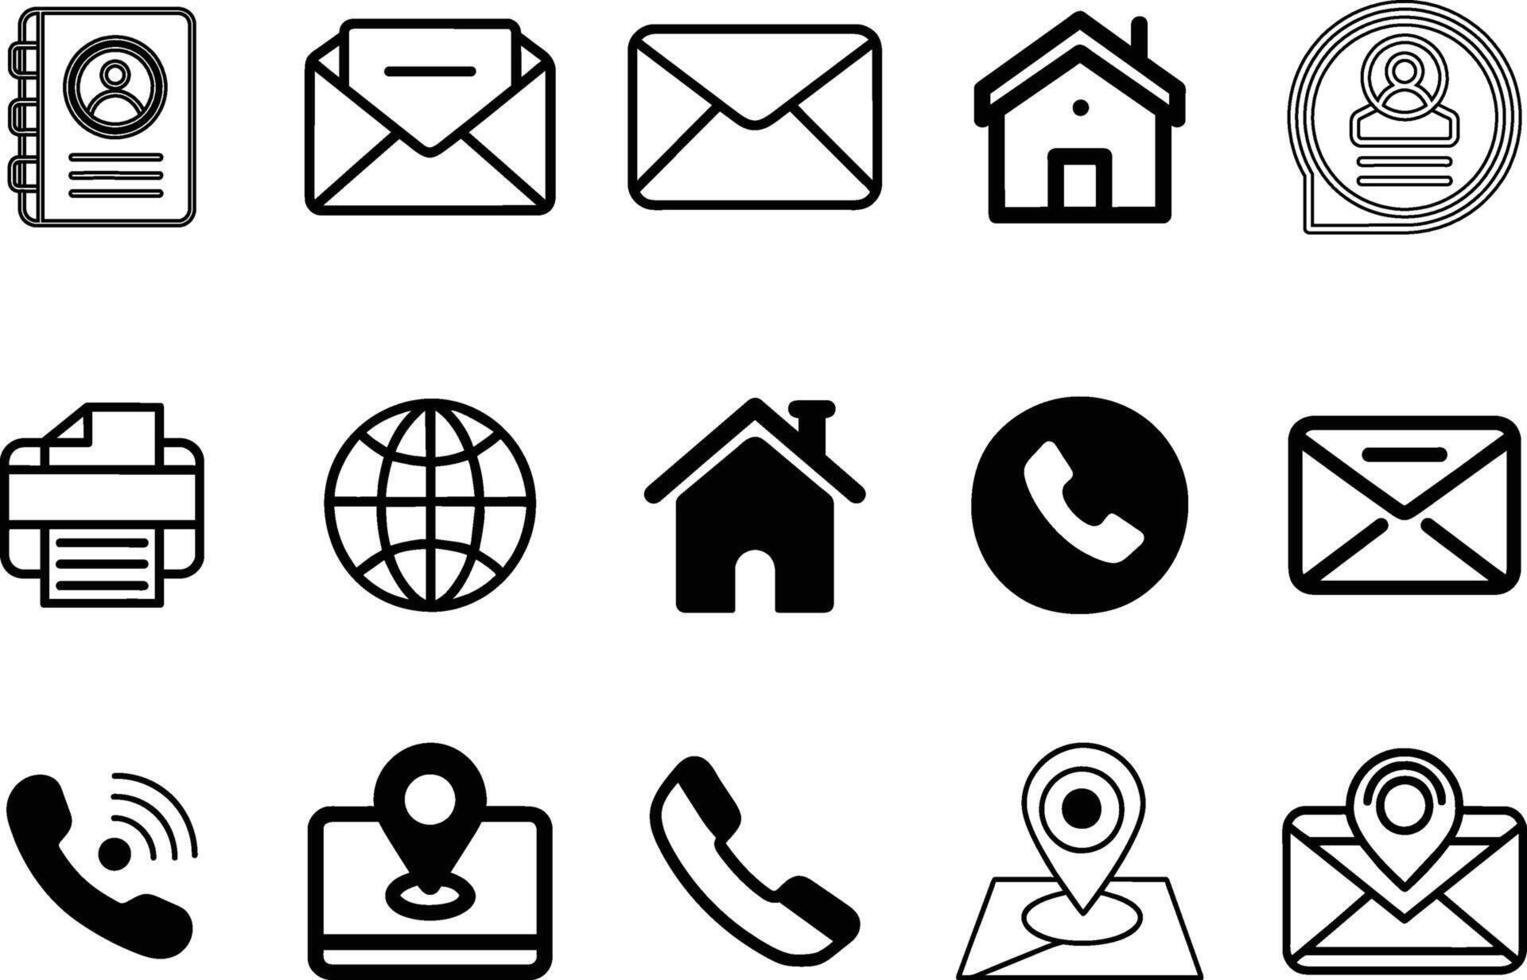 various icons of various types, including a phone, mail, and envelope vector